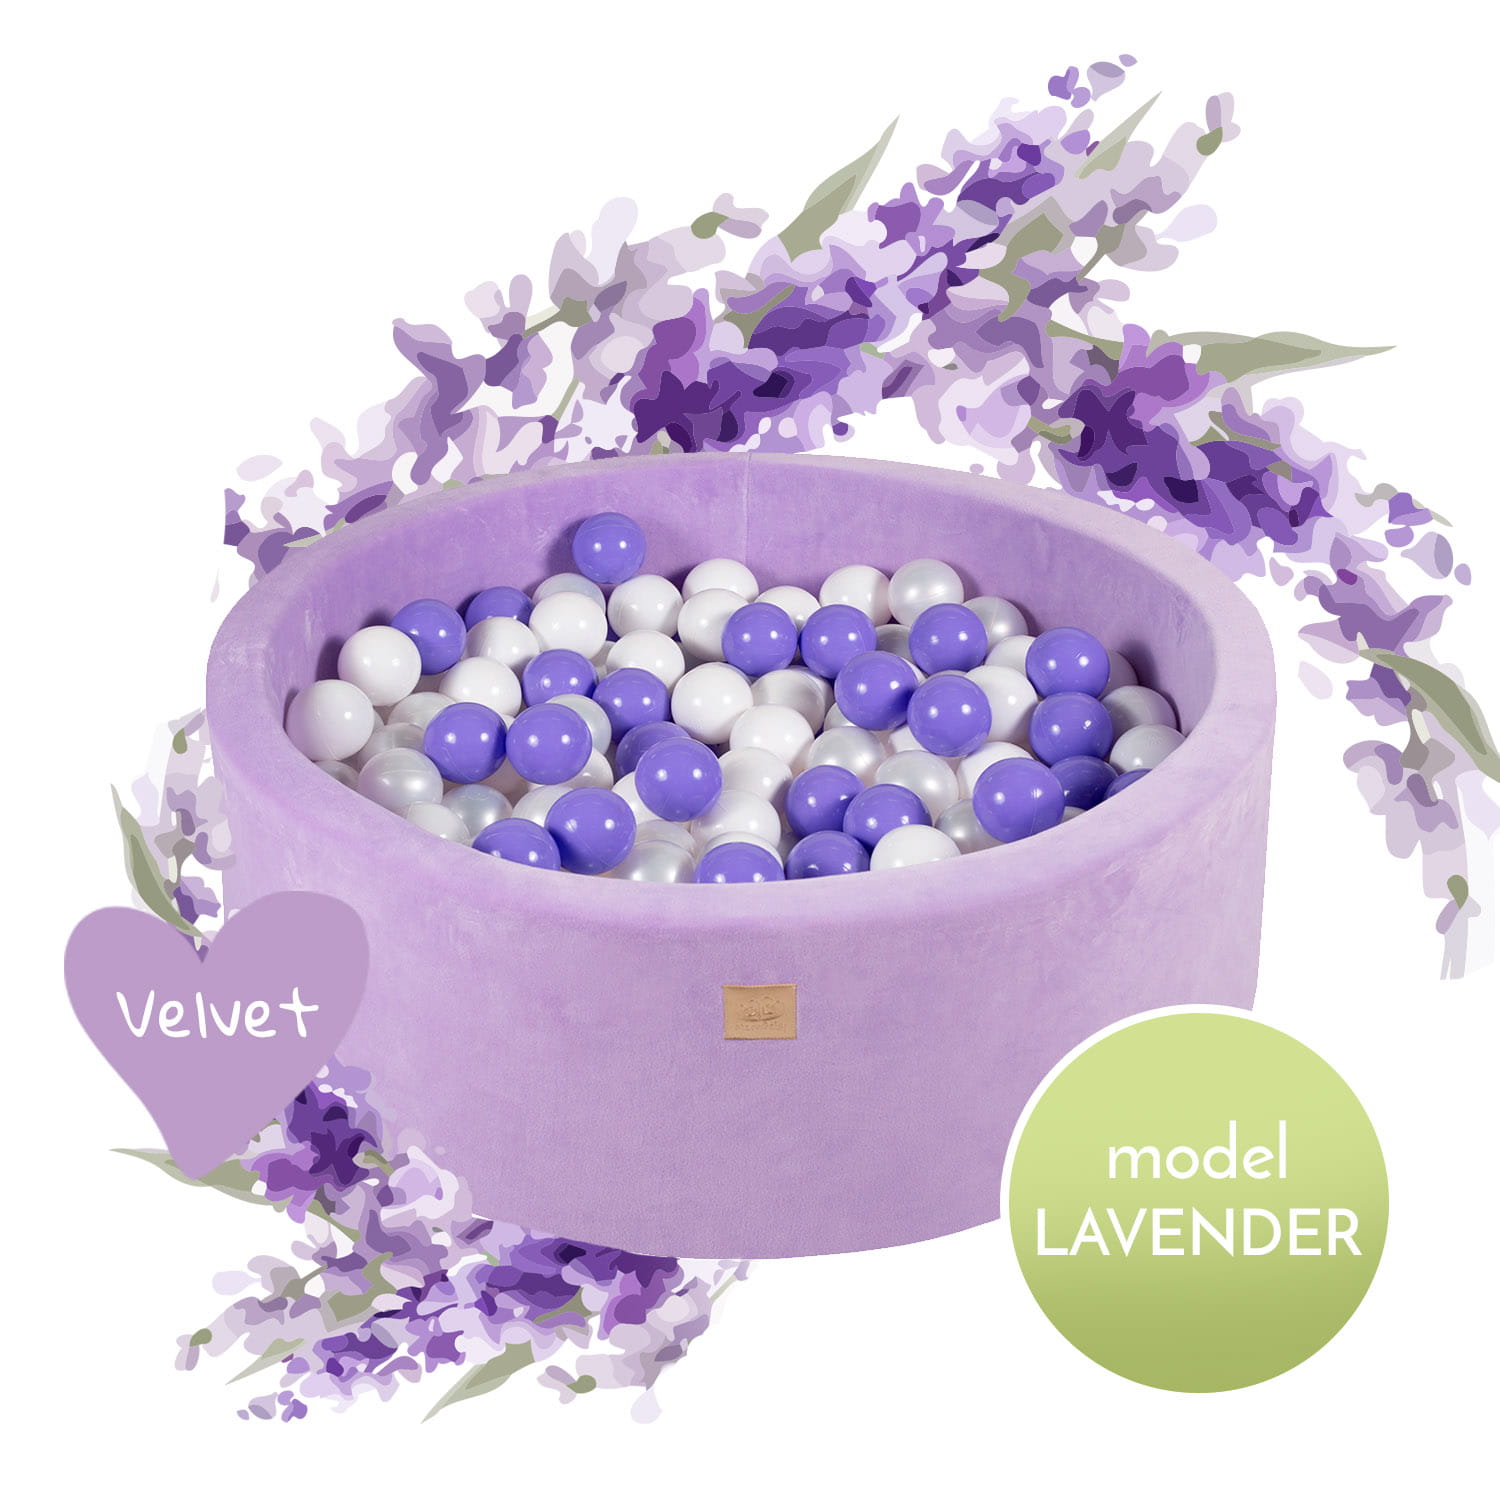 MeowBaby Baby Foam Round Ball Pit 90x30cm with 250 Balls 7cm Certified, Velvet, Lilac, Model Lavender